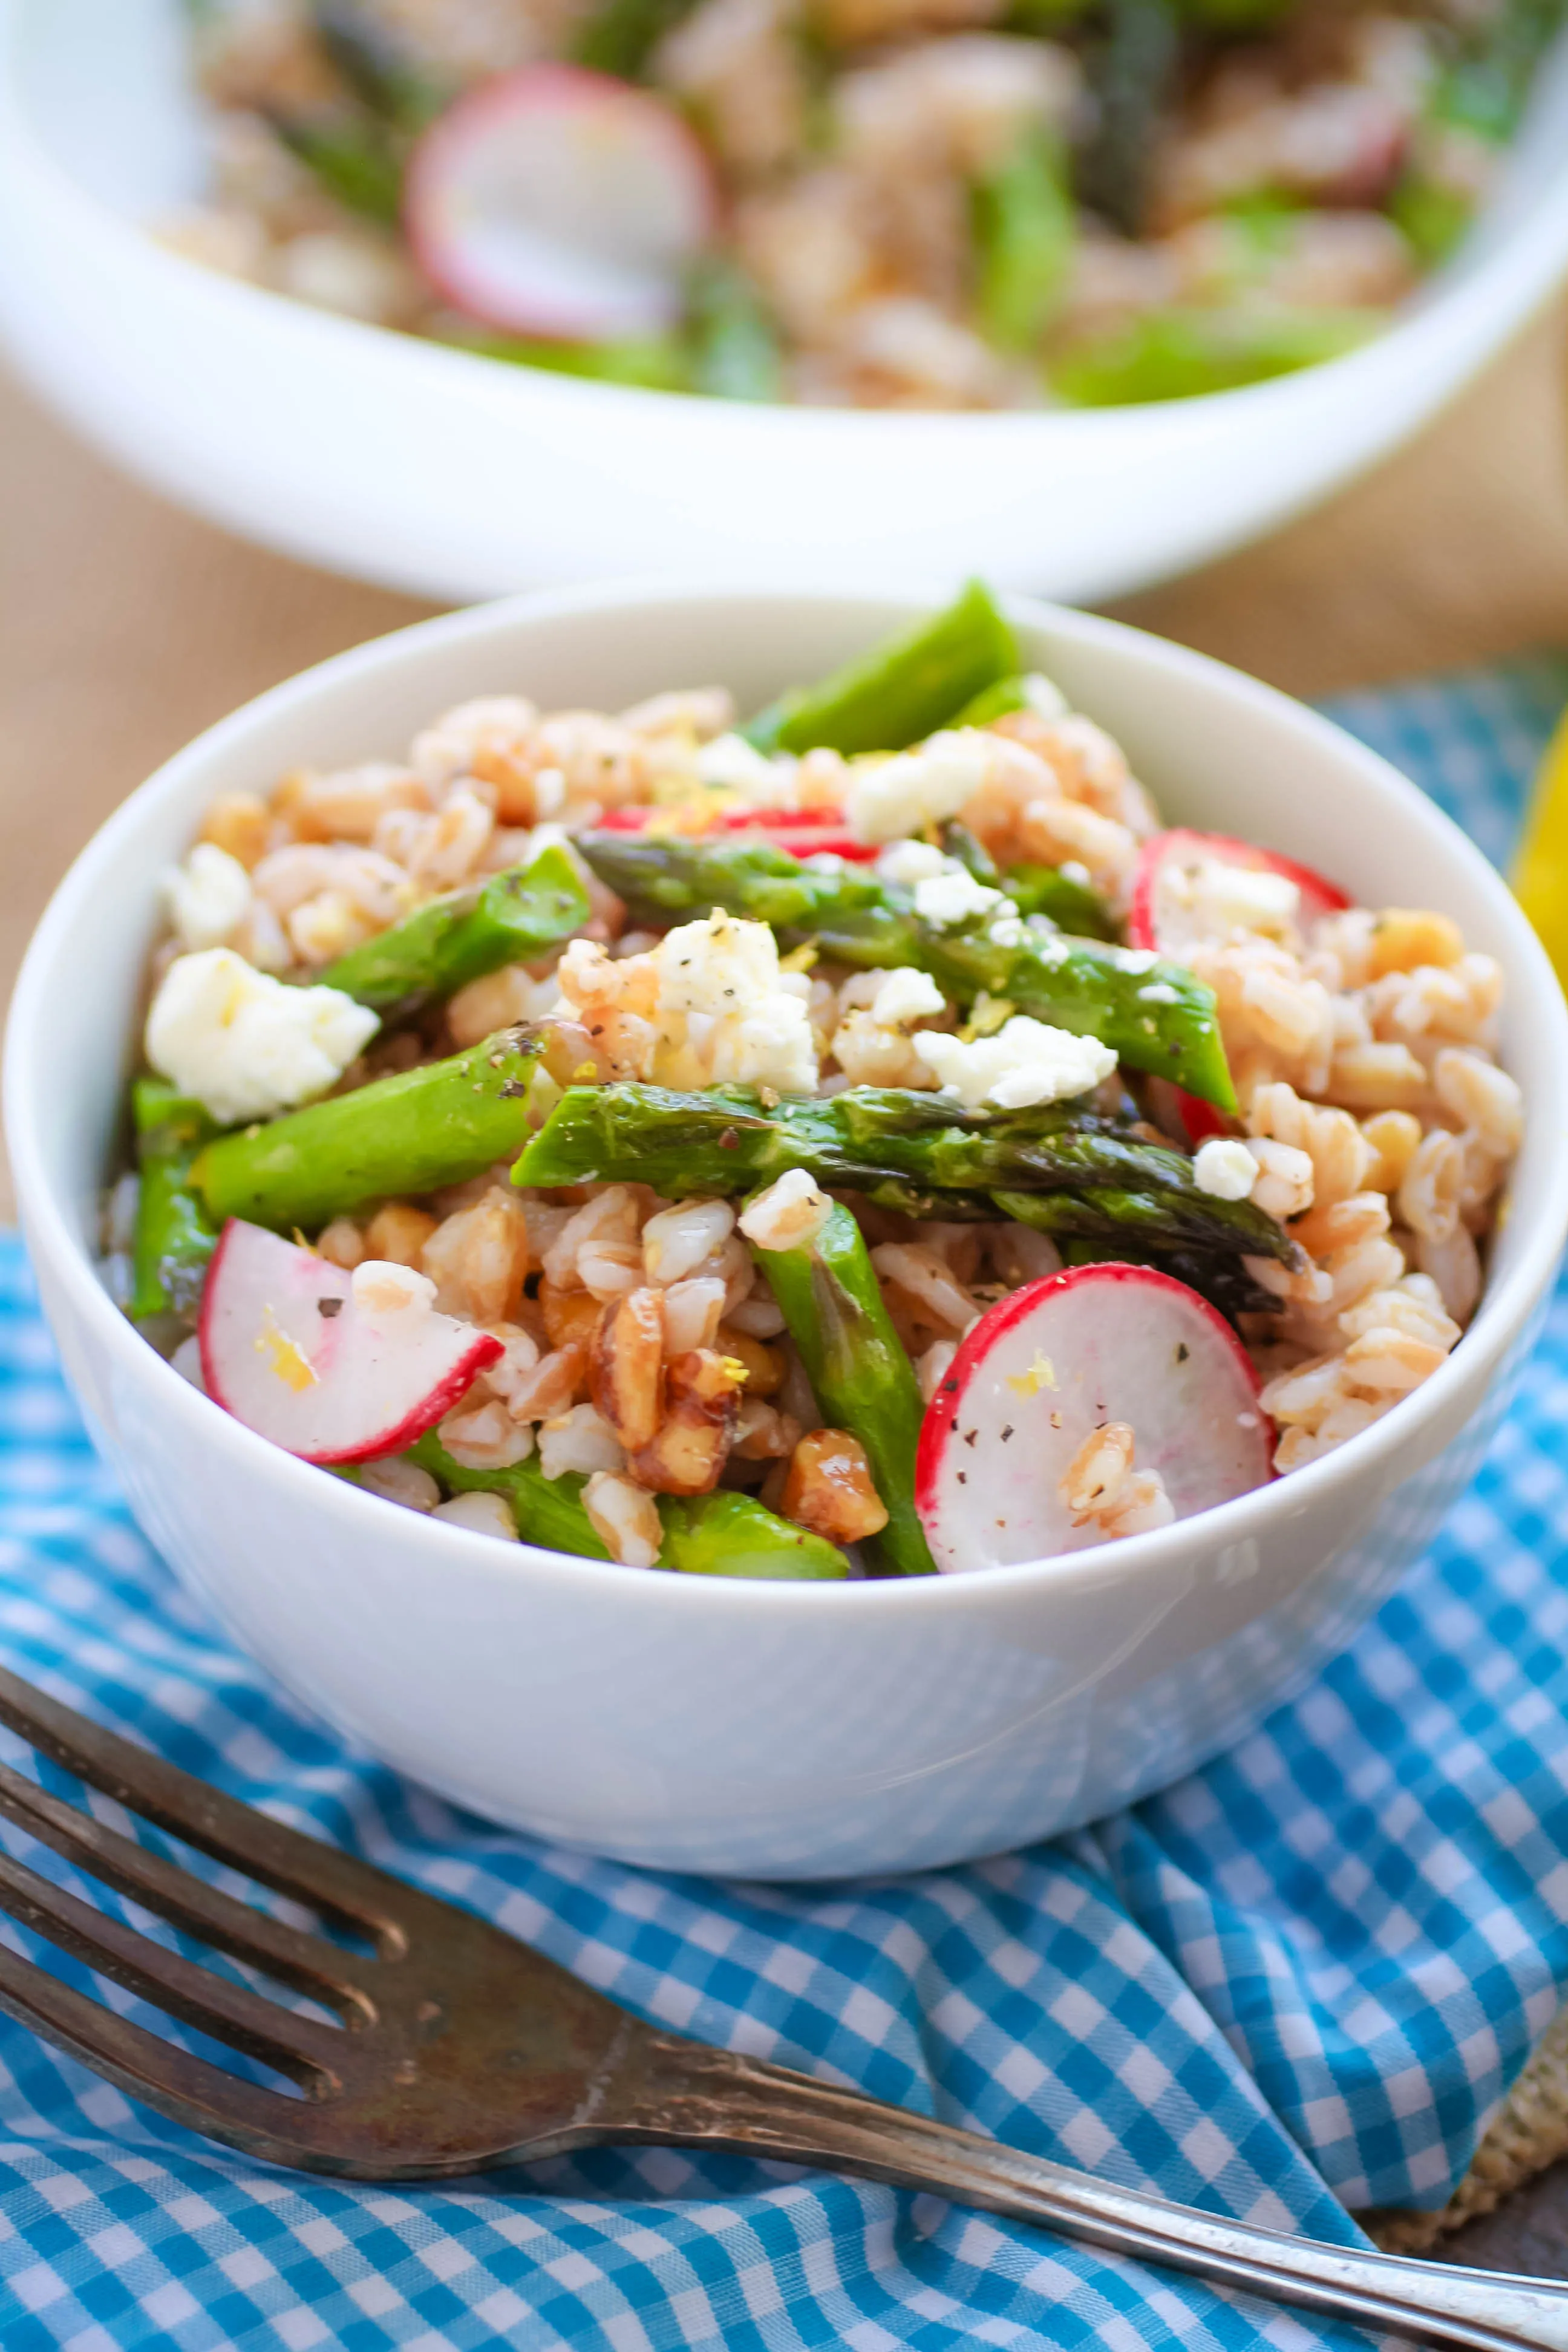 Farro Salad with Asparagus, Radishes & Lemon Vinaigrette is nice as a side or as part of a lighter meal. Enjoy this Farro Salad with Asparagus, Radishes & Lemon Vinaigrette this season.